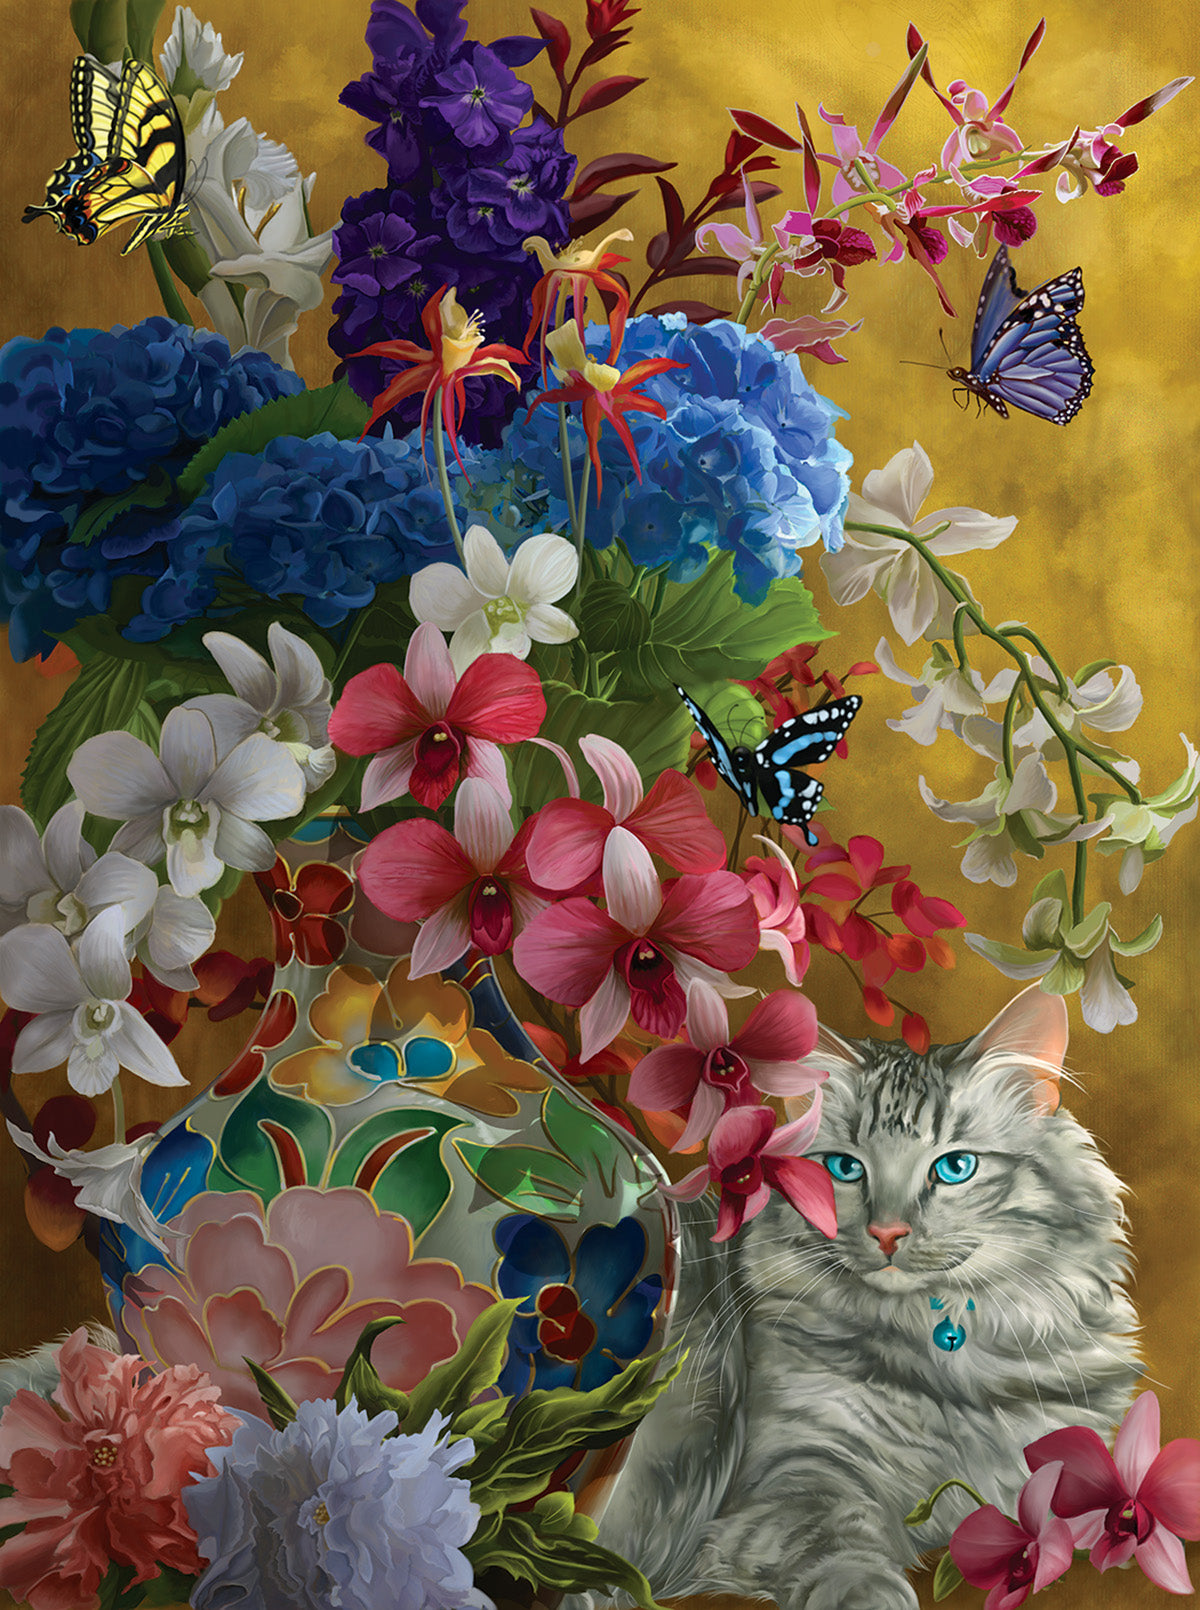 Gilded Cats And Flowers - 1000 Piece Jigsaw Puzzle